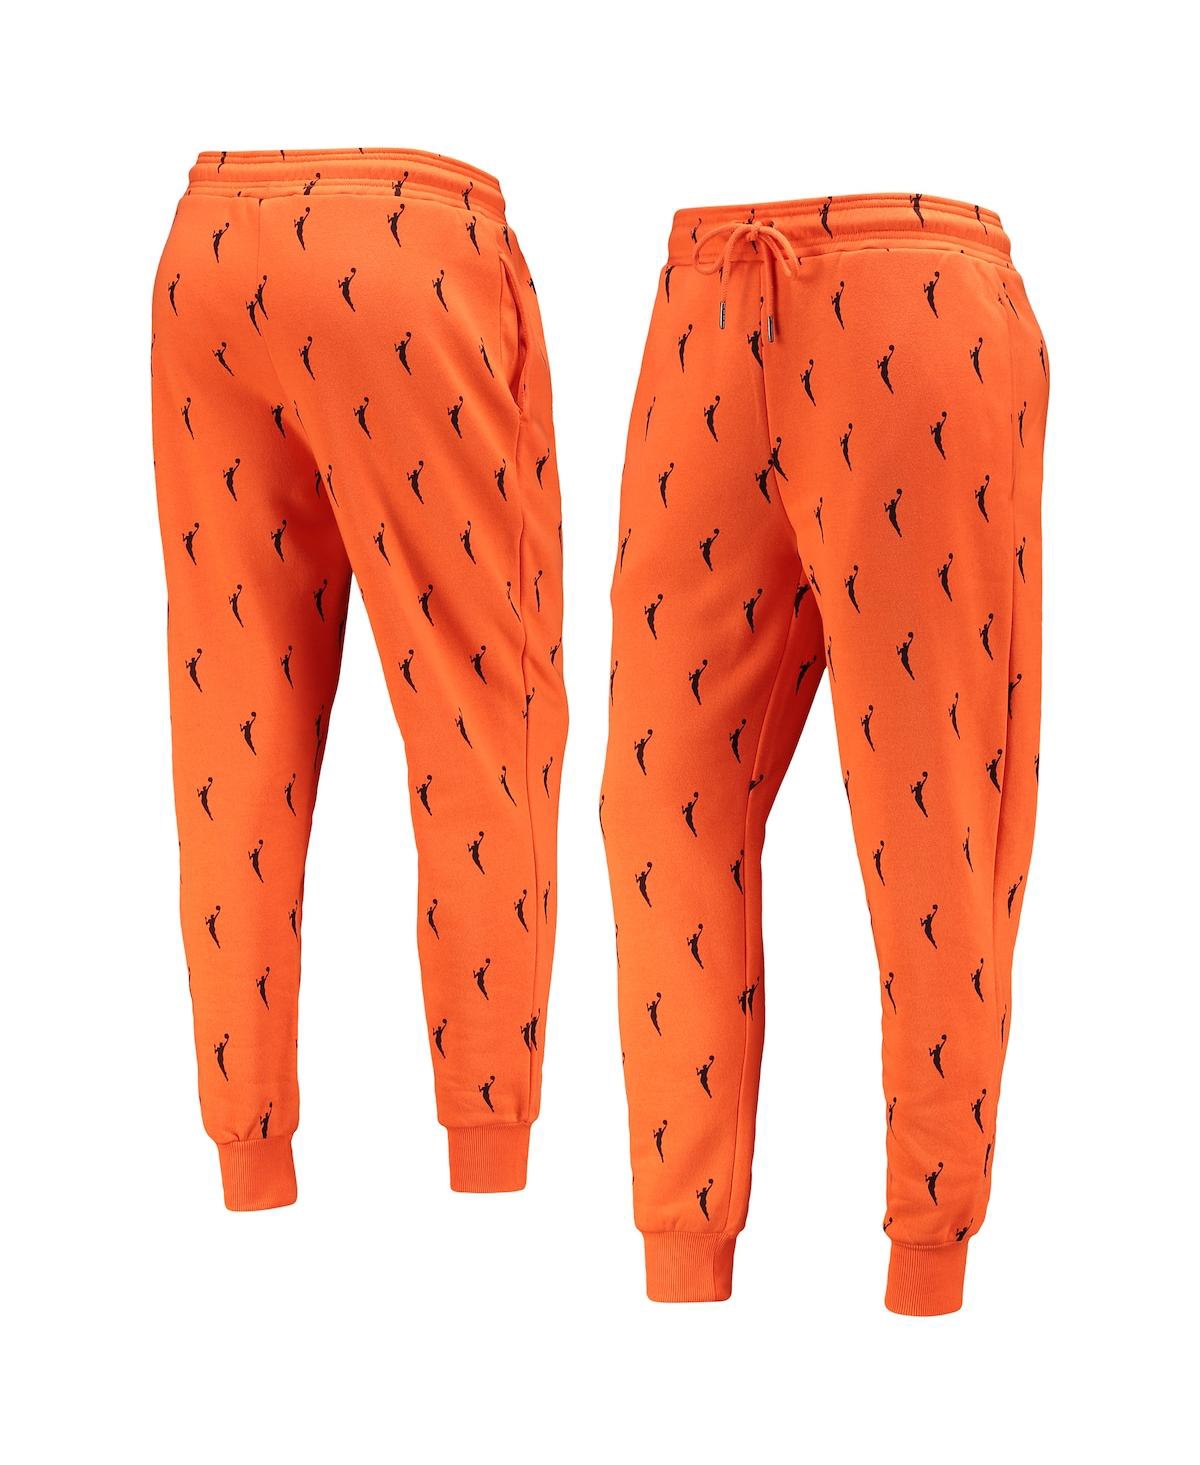 THE WILD COLLECTIVE WOMEN'S THE WILD COLLECTIVE ORANGE WNBA ALL OVER PRINT JOGGERS